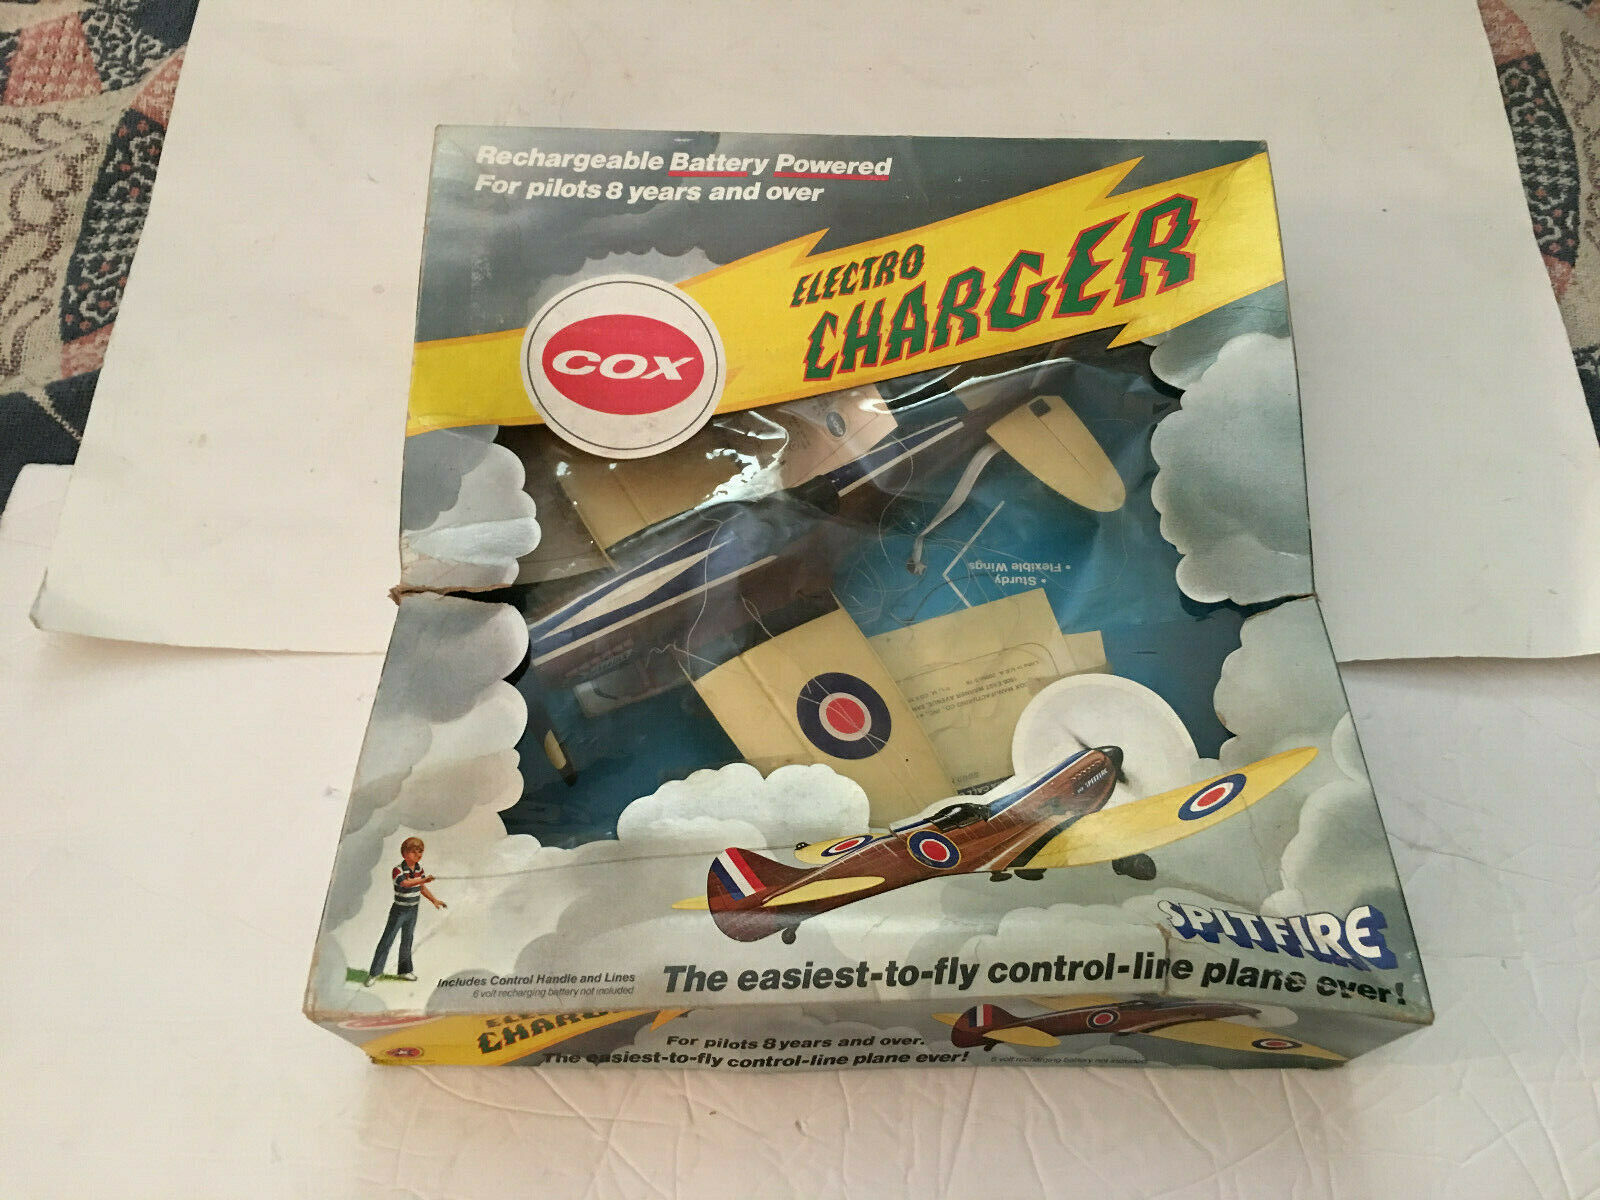 Vintage 1976 Cox Electro Charger Spitfire Airplane In Box